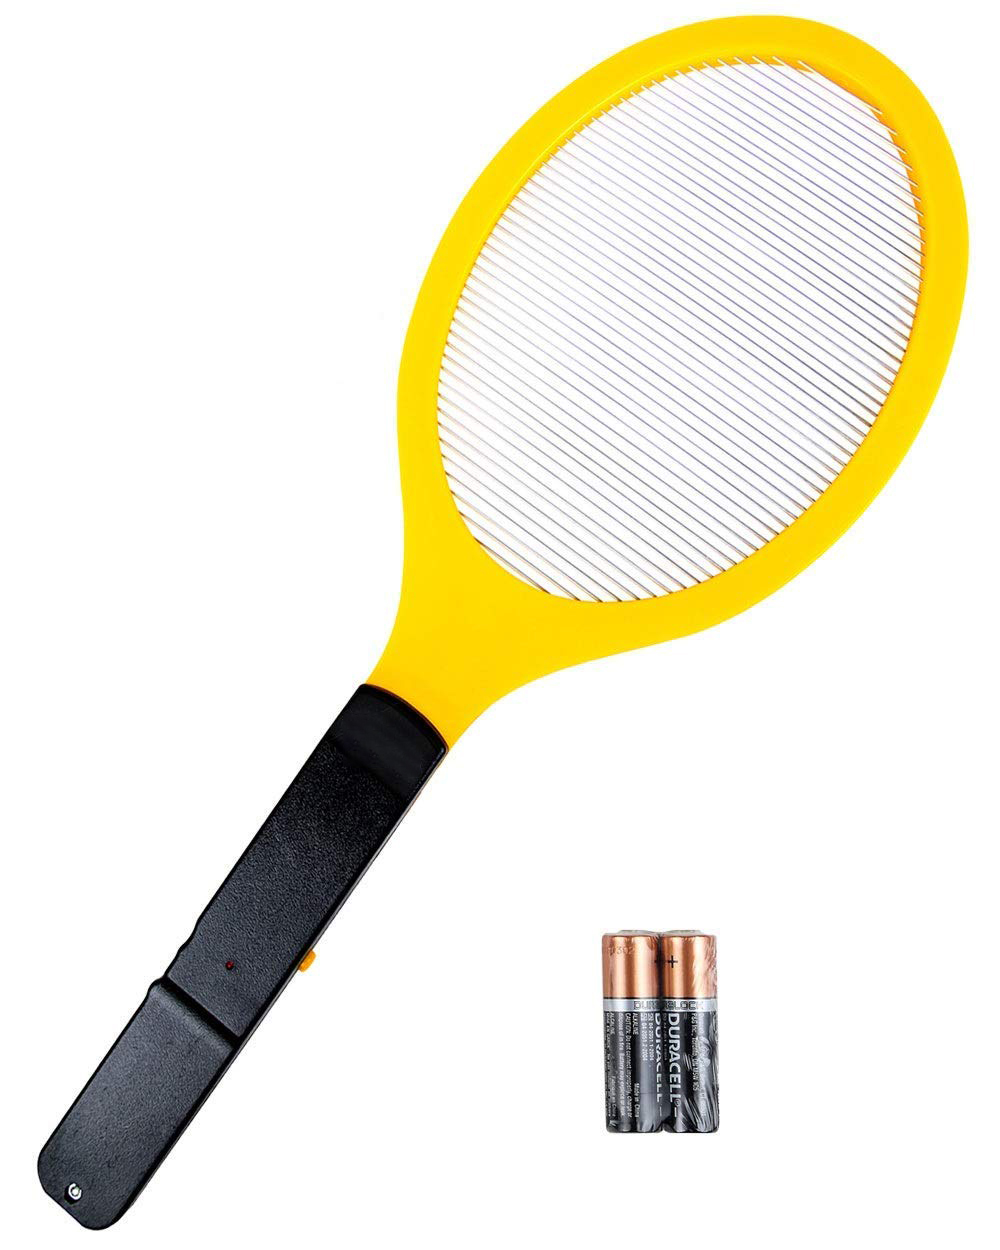 Zap Electric Bug Racket Fly Swatter Mosquito Indoor and Outdoor, Pest Control, Fly Killer - image 5 of 8